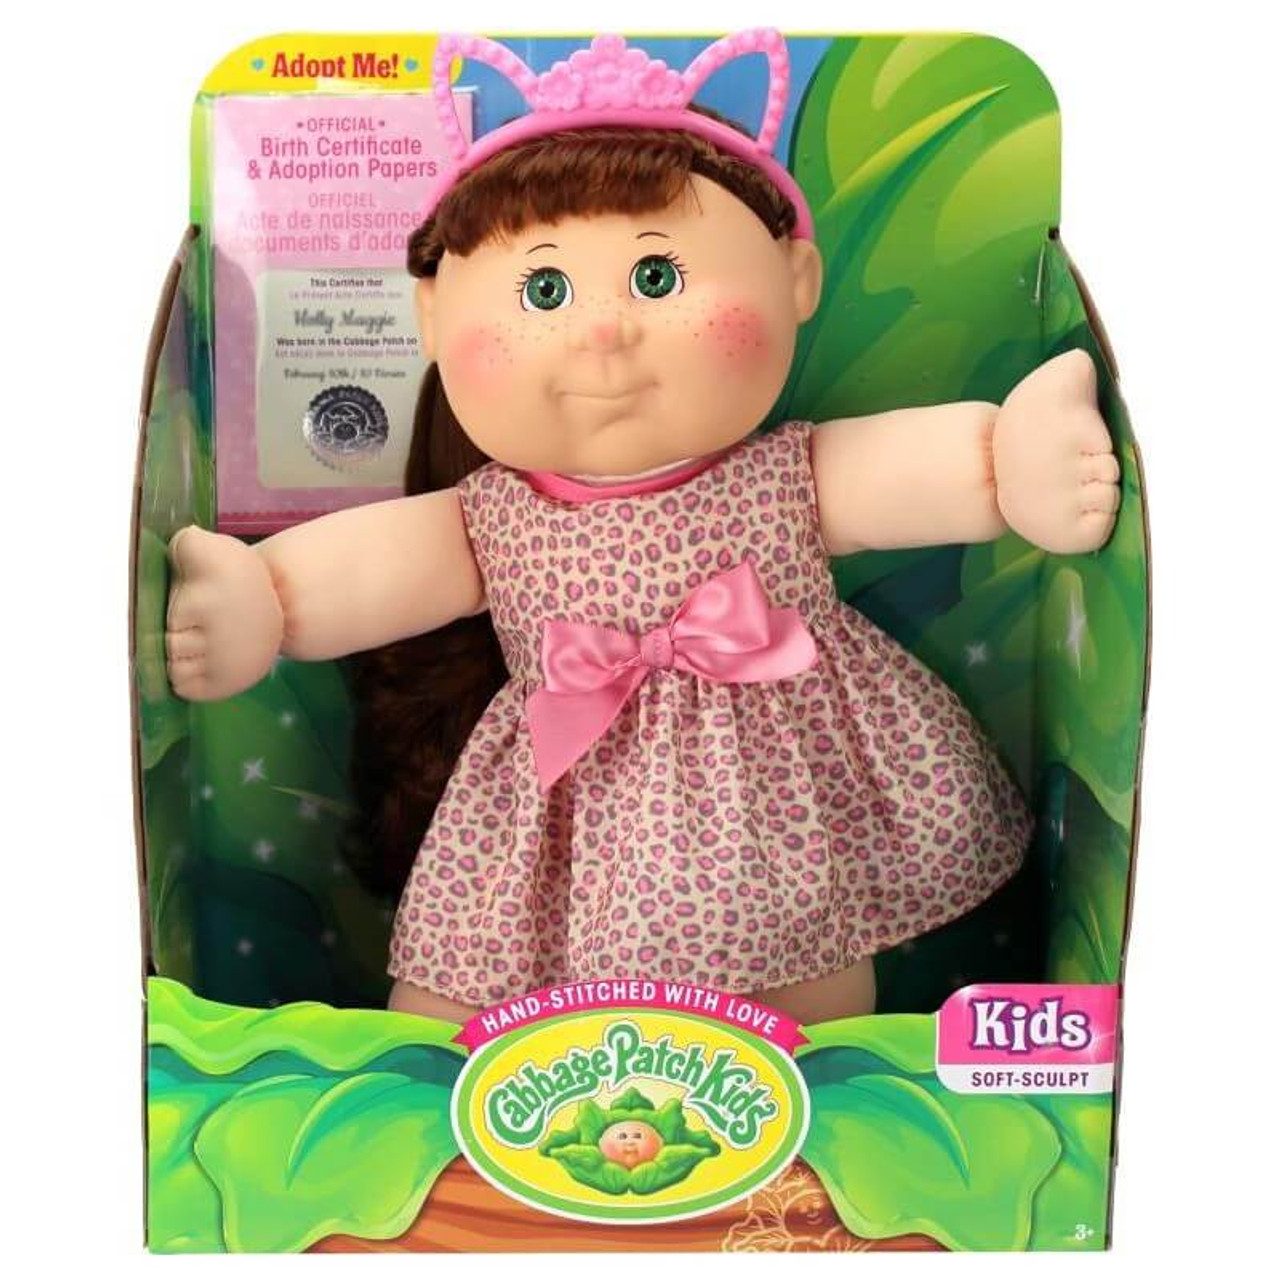 the cabbage patch kids